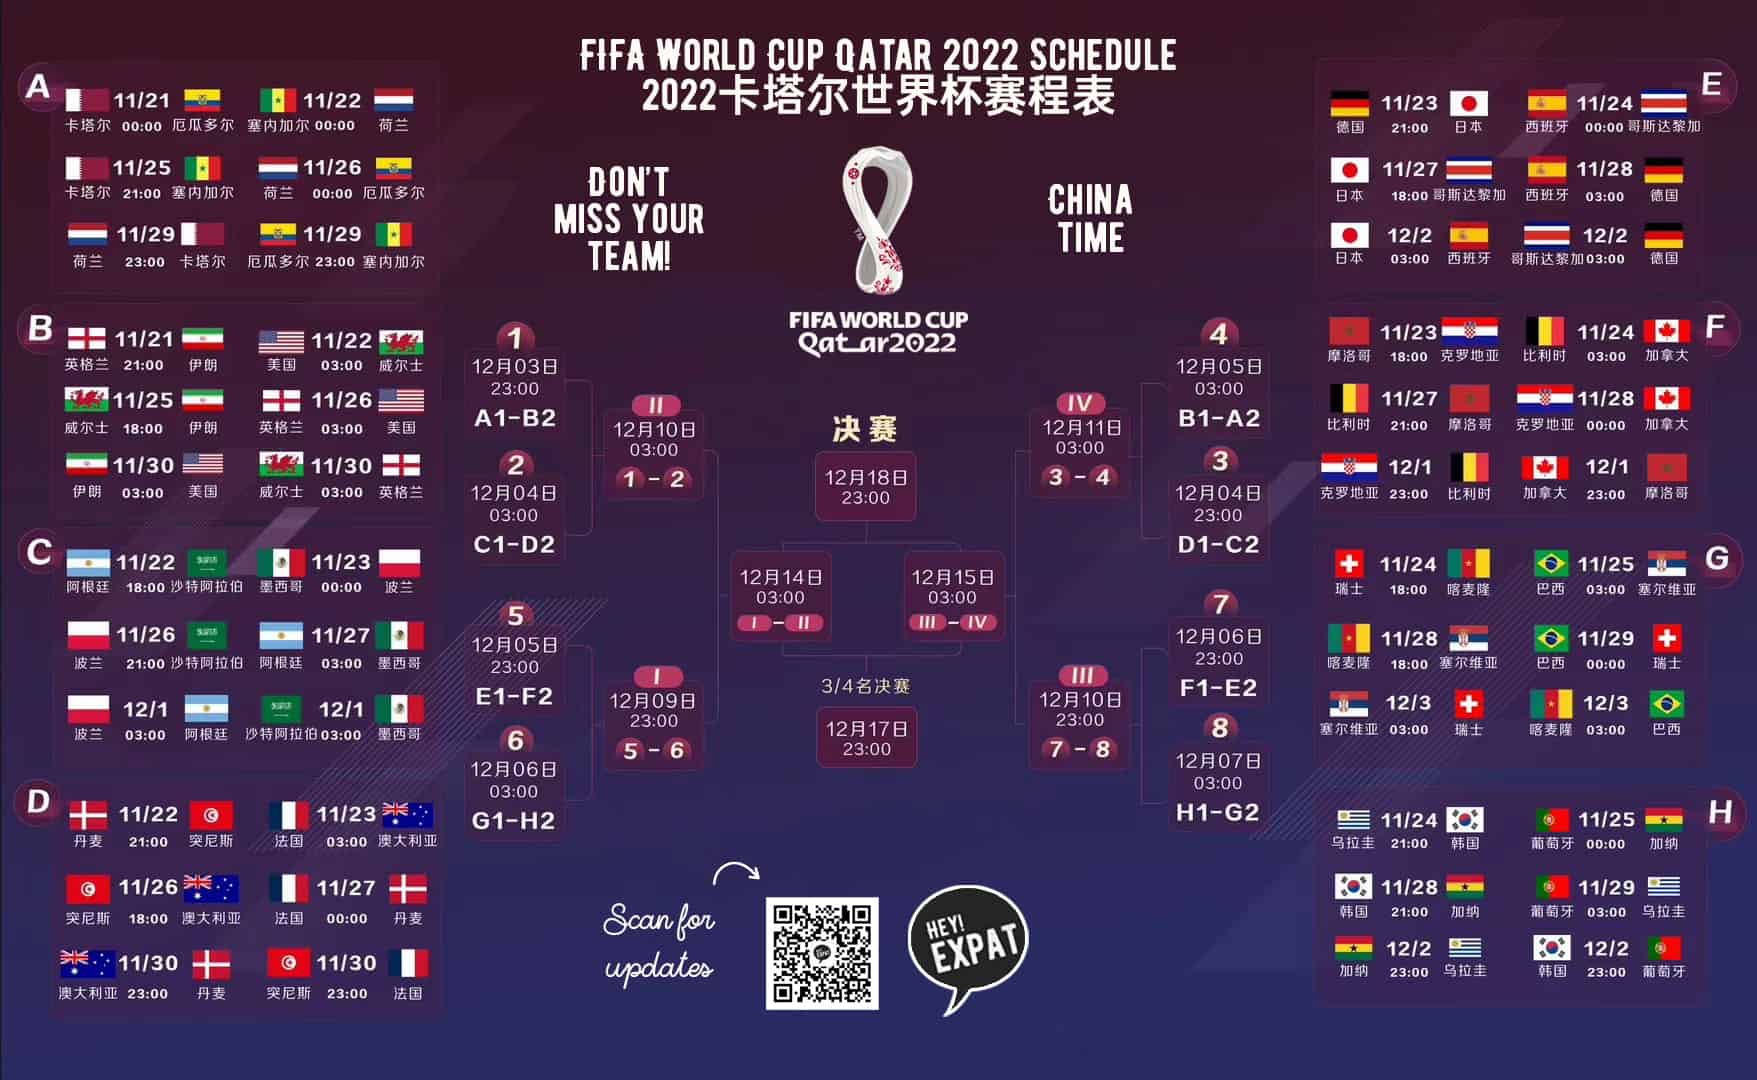 2022 China-time Qatar World Cup Schedule